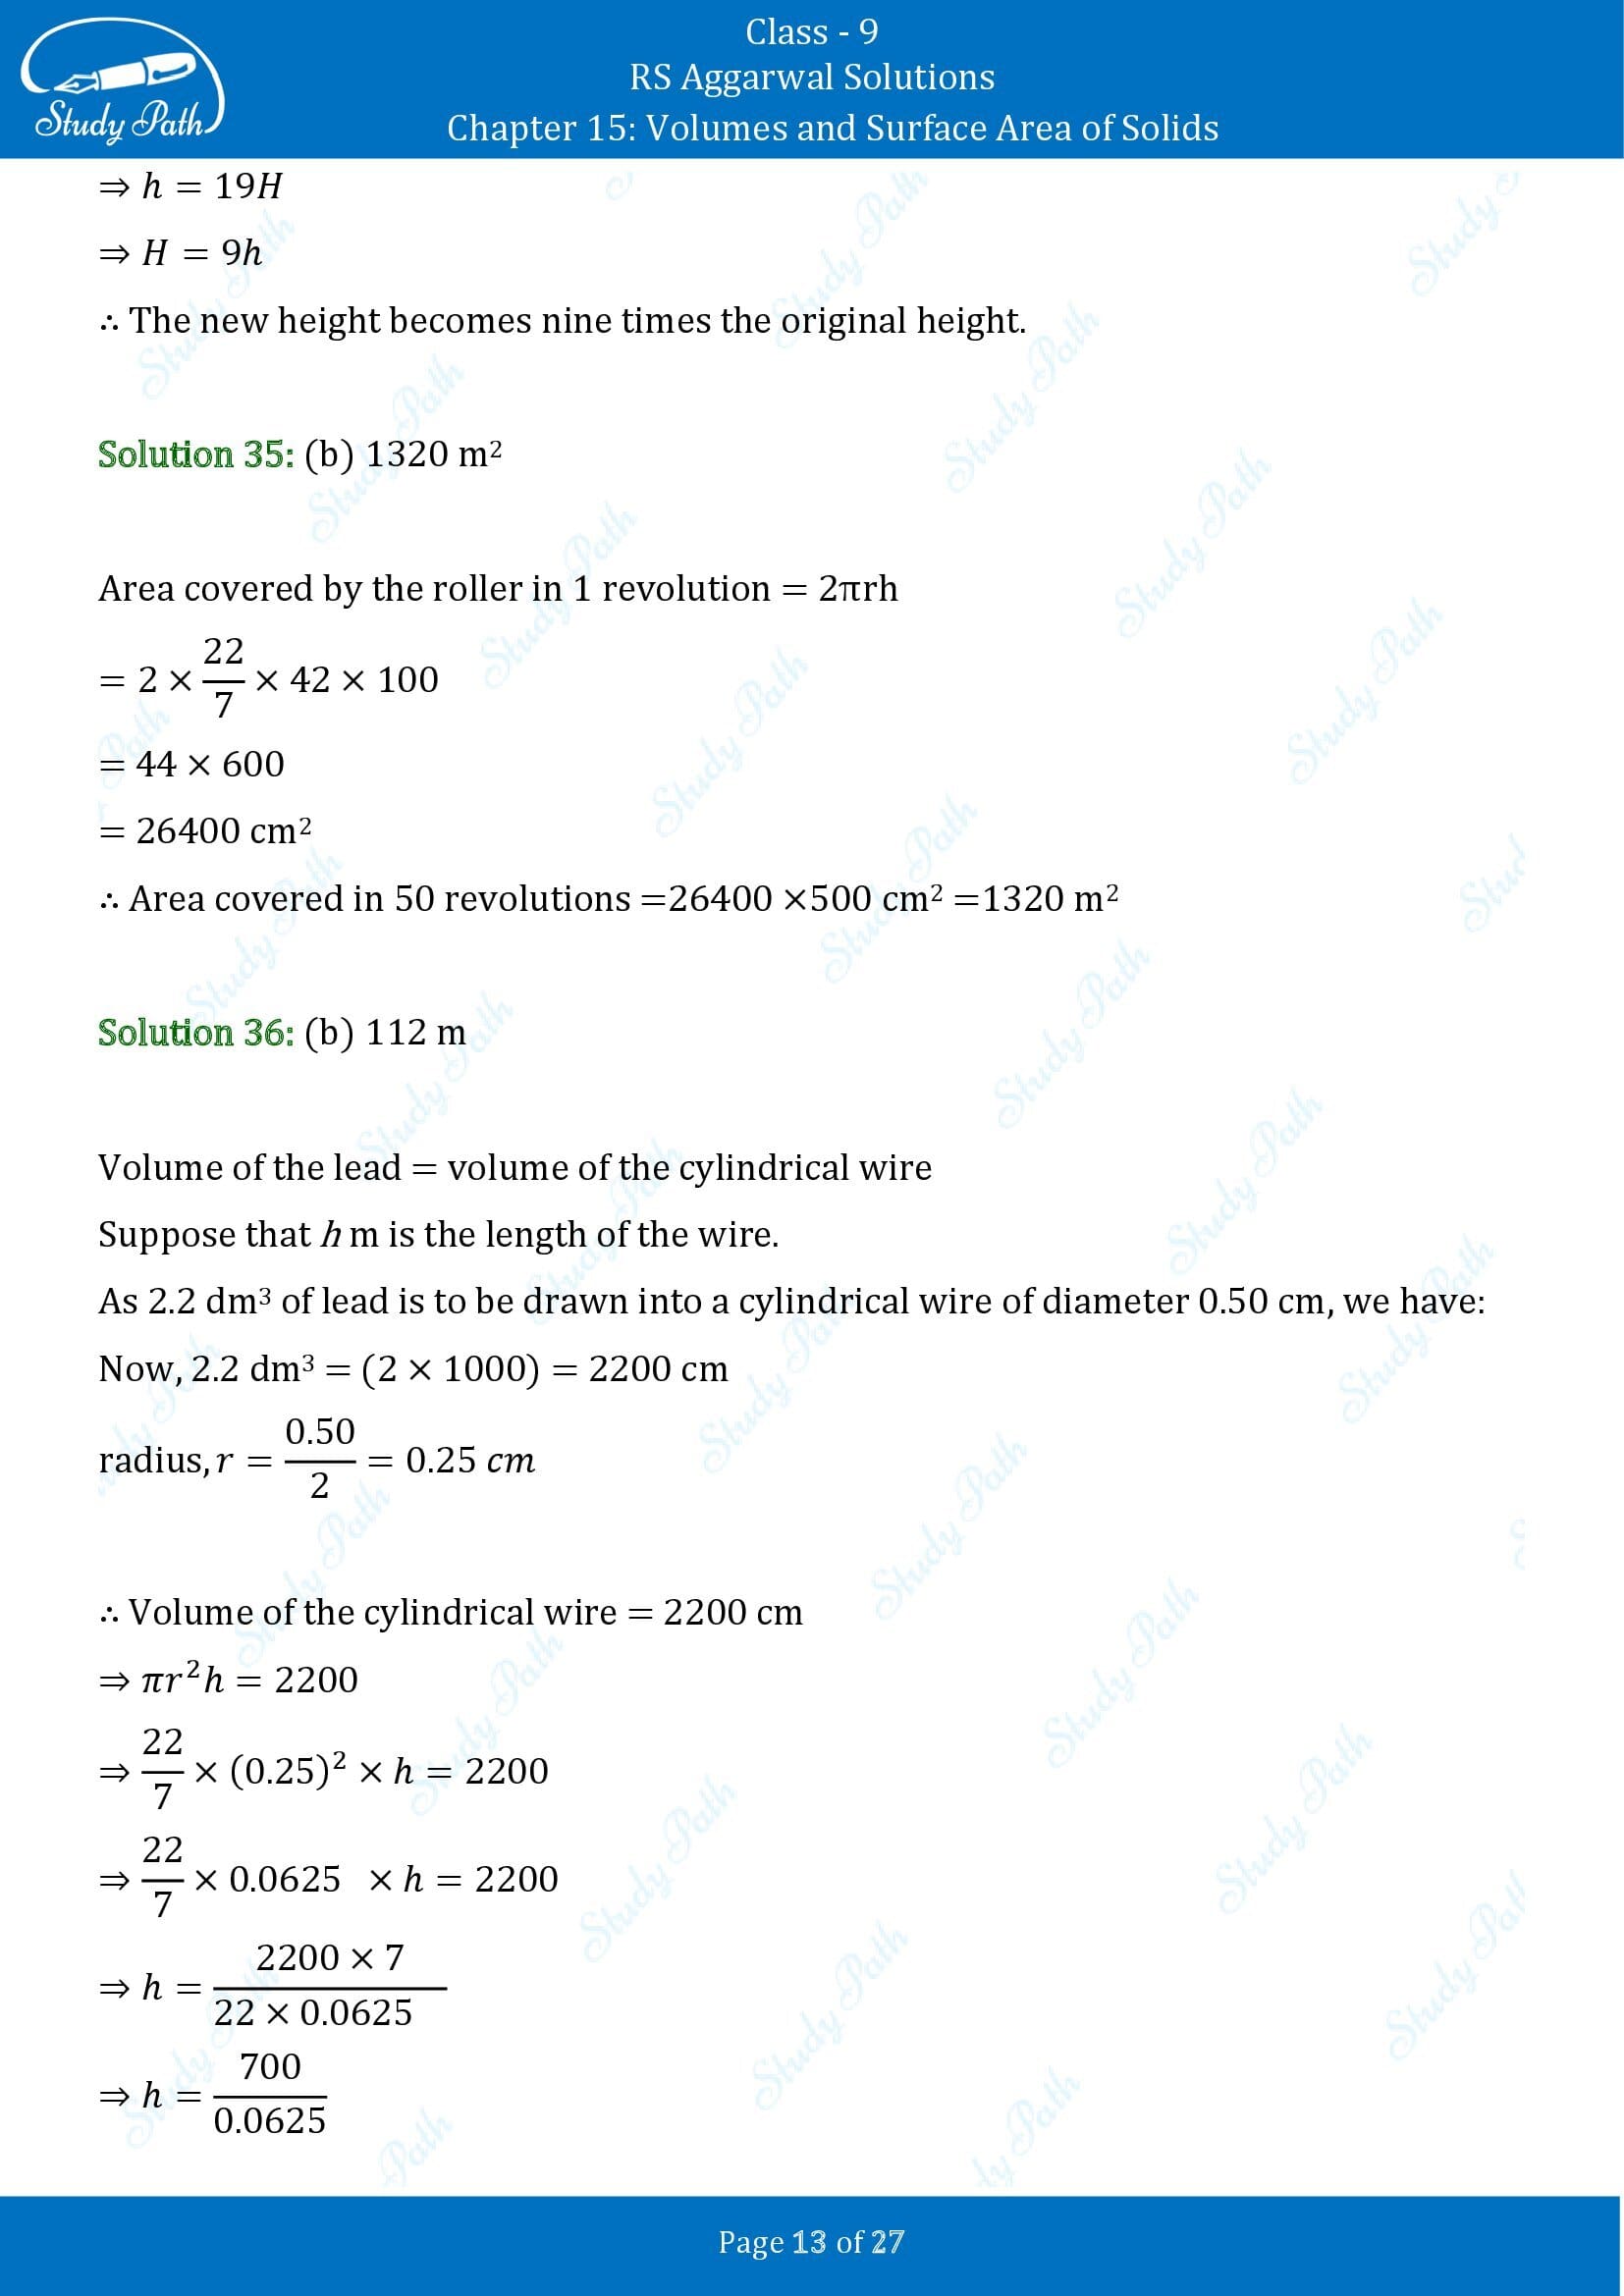 RS Aggarwal Solutions Class 9 Chapter 15 Volumes and Surface Area of Solids Multiple Choice Questions MCQs 00013